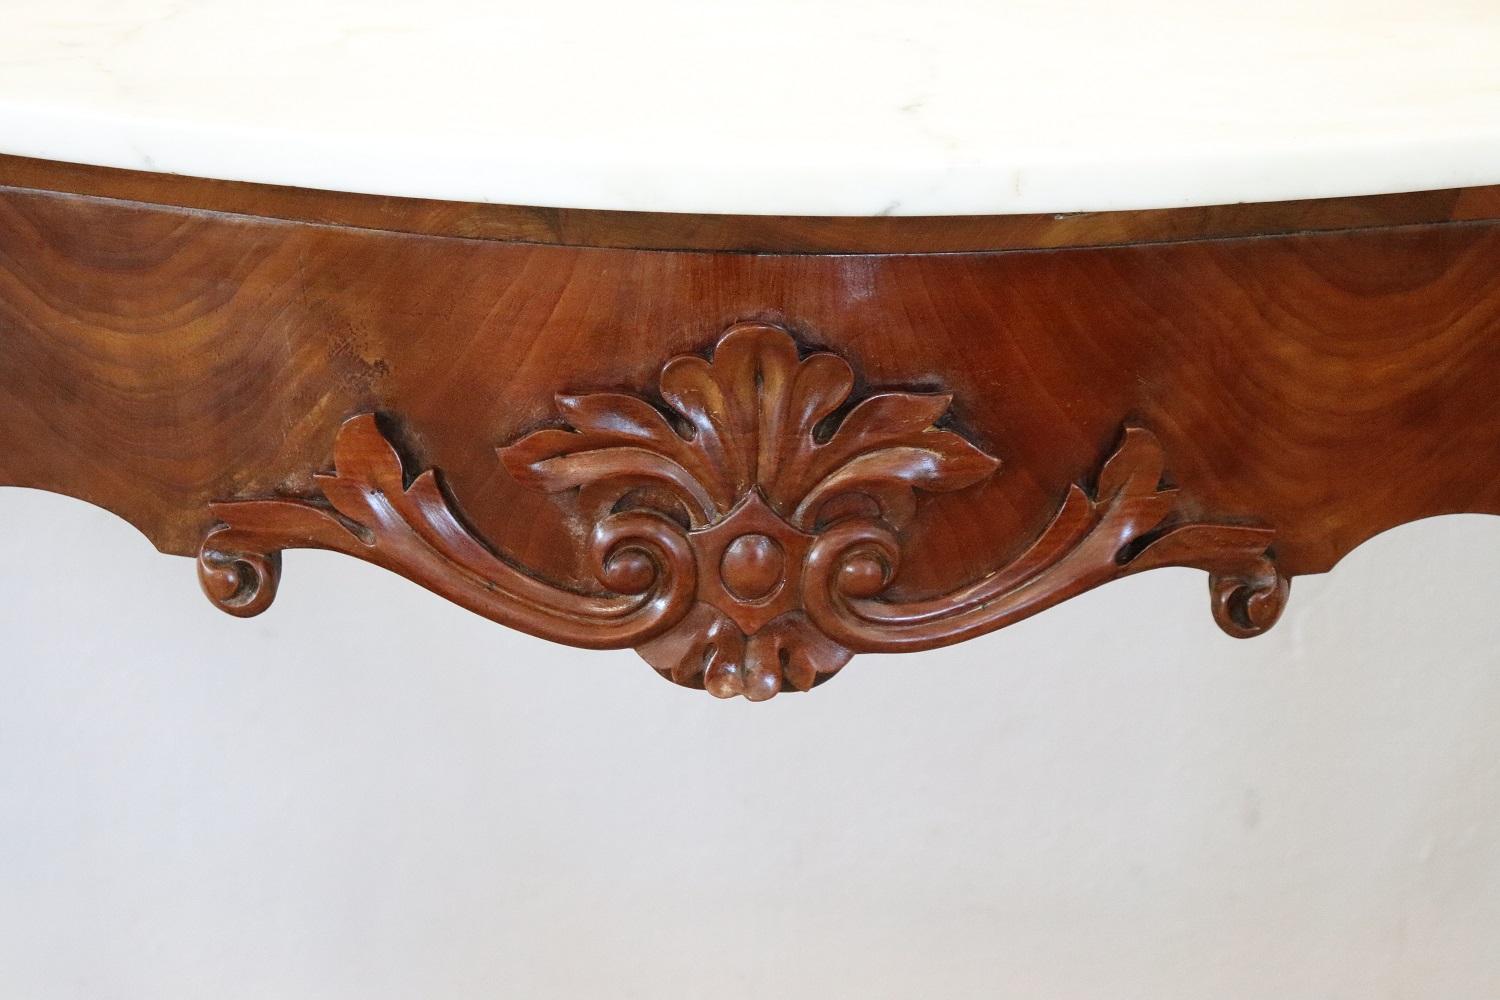 Antique console table Louis Philippe 1850s. The console is made of solid carved walnut. Elegant Italian white marble top. Rare due to its small size, perfect to be placed even in small rooms or representative entrances. You can receive perfectly